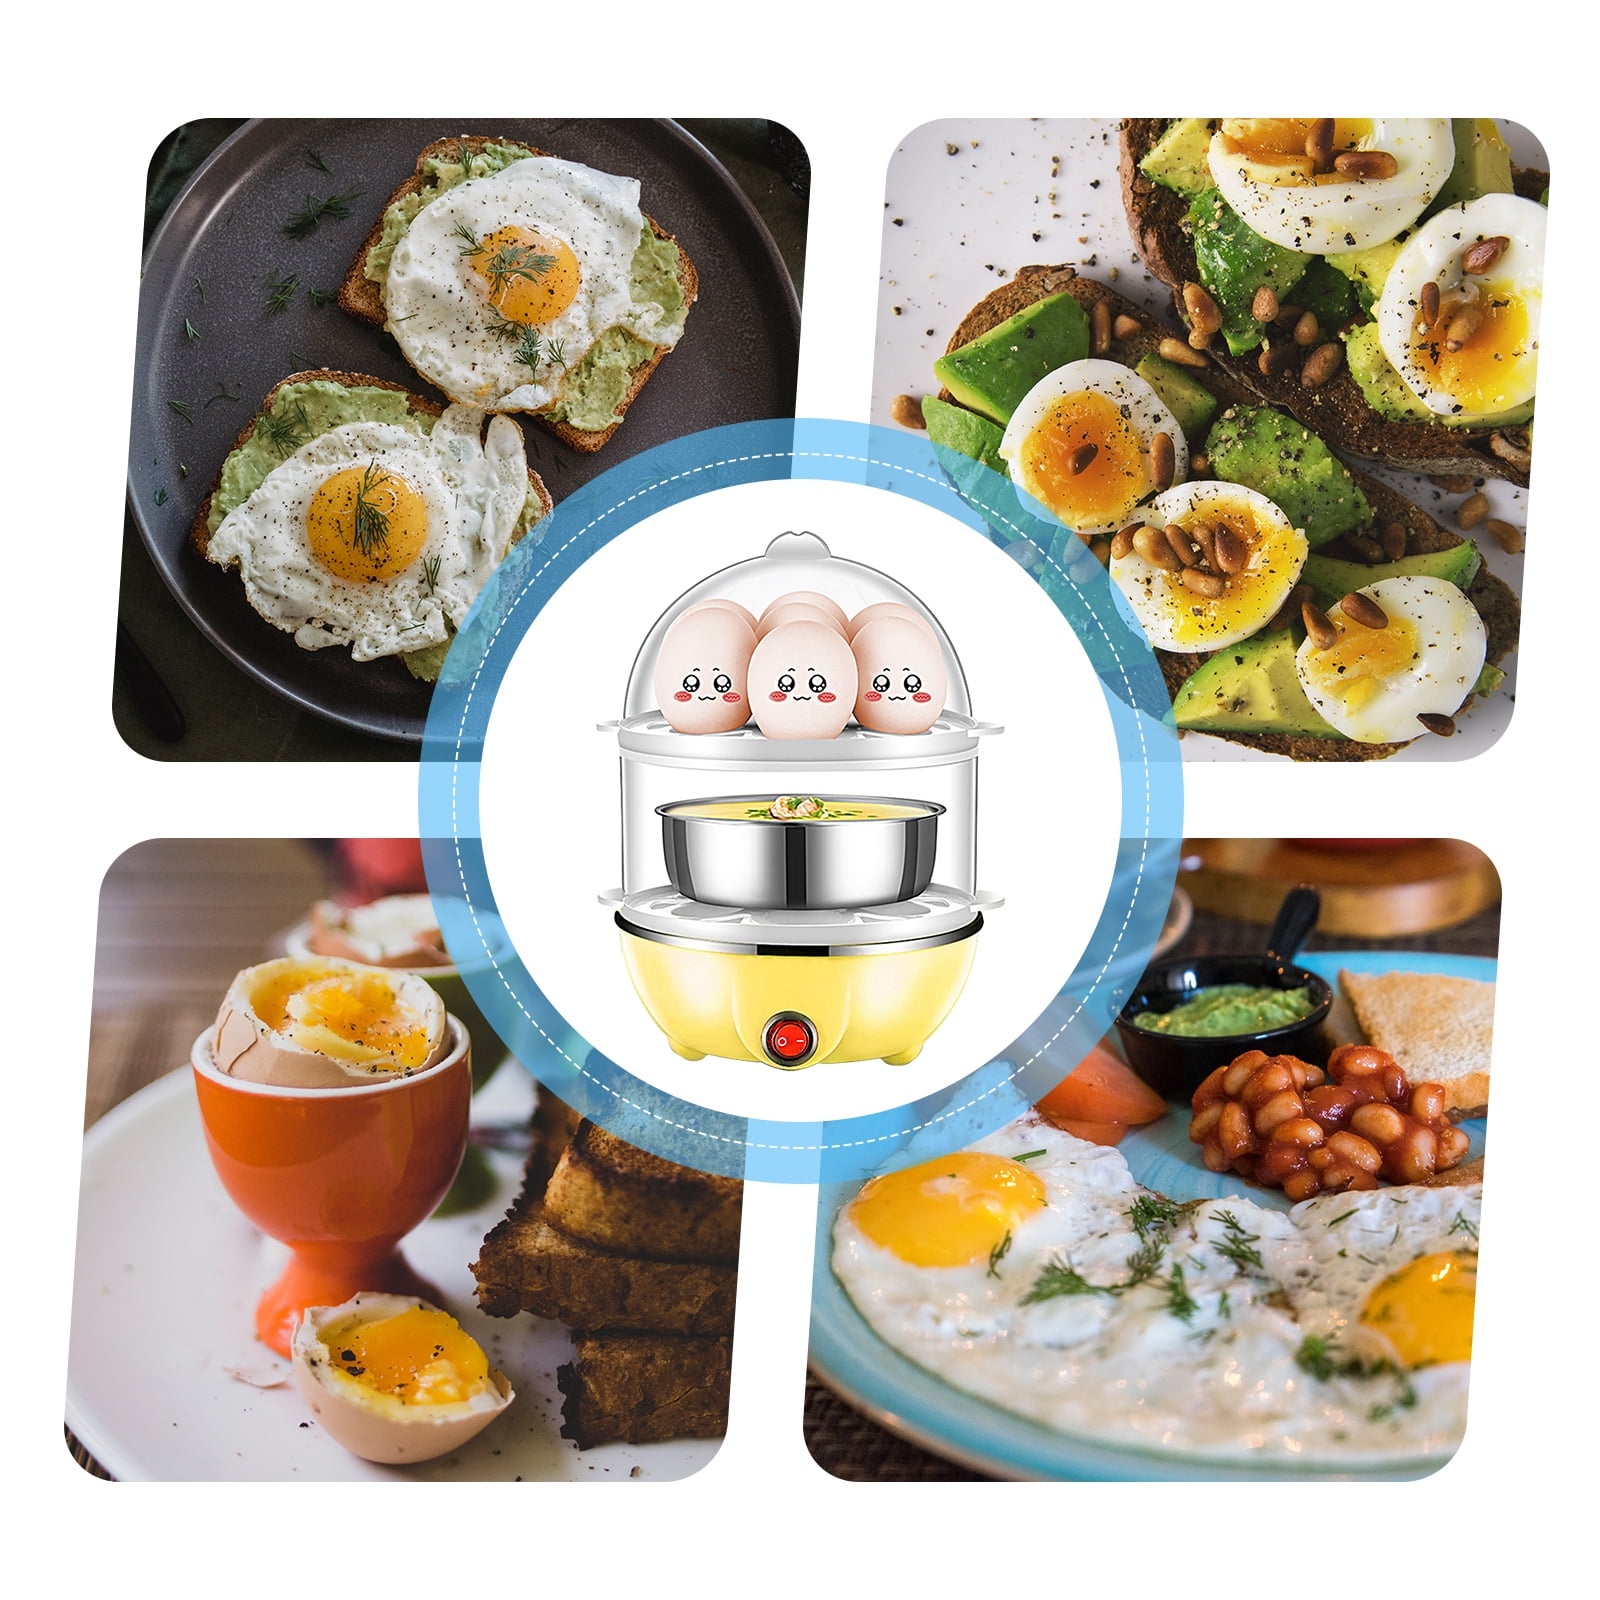 Egg Cooker Rapid Poacher Maker UP TO 14 Eggs Capacity Electric Large Egg  Boiler for Hard Boiled Eggs with Auto Shut Off Double/Single Stack Cool